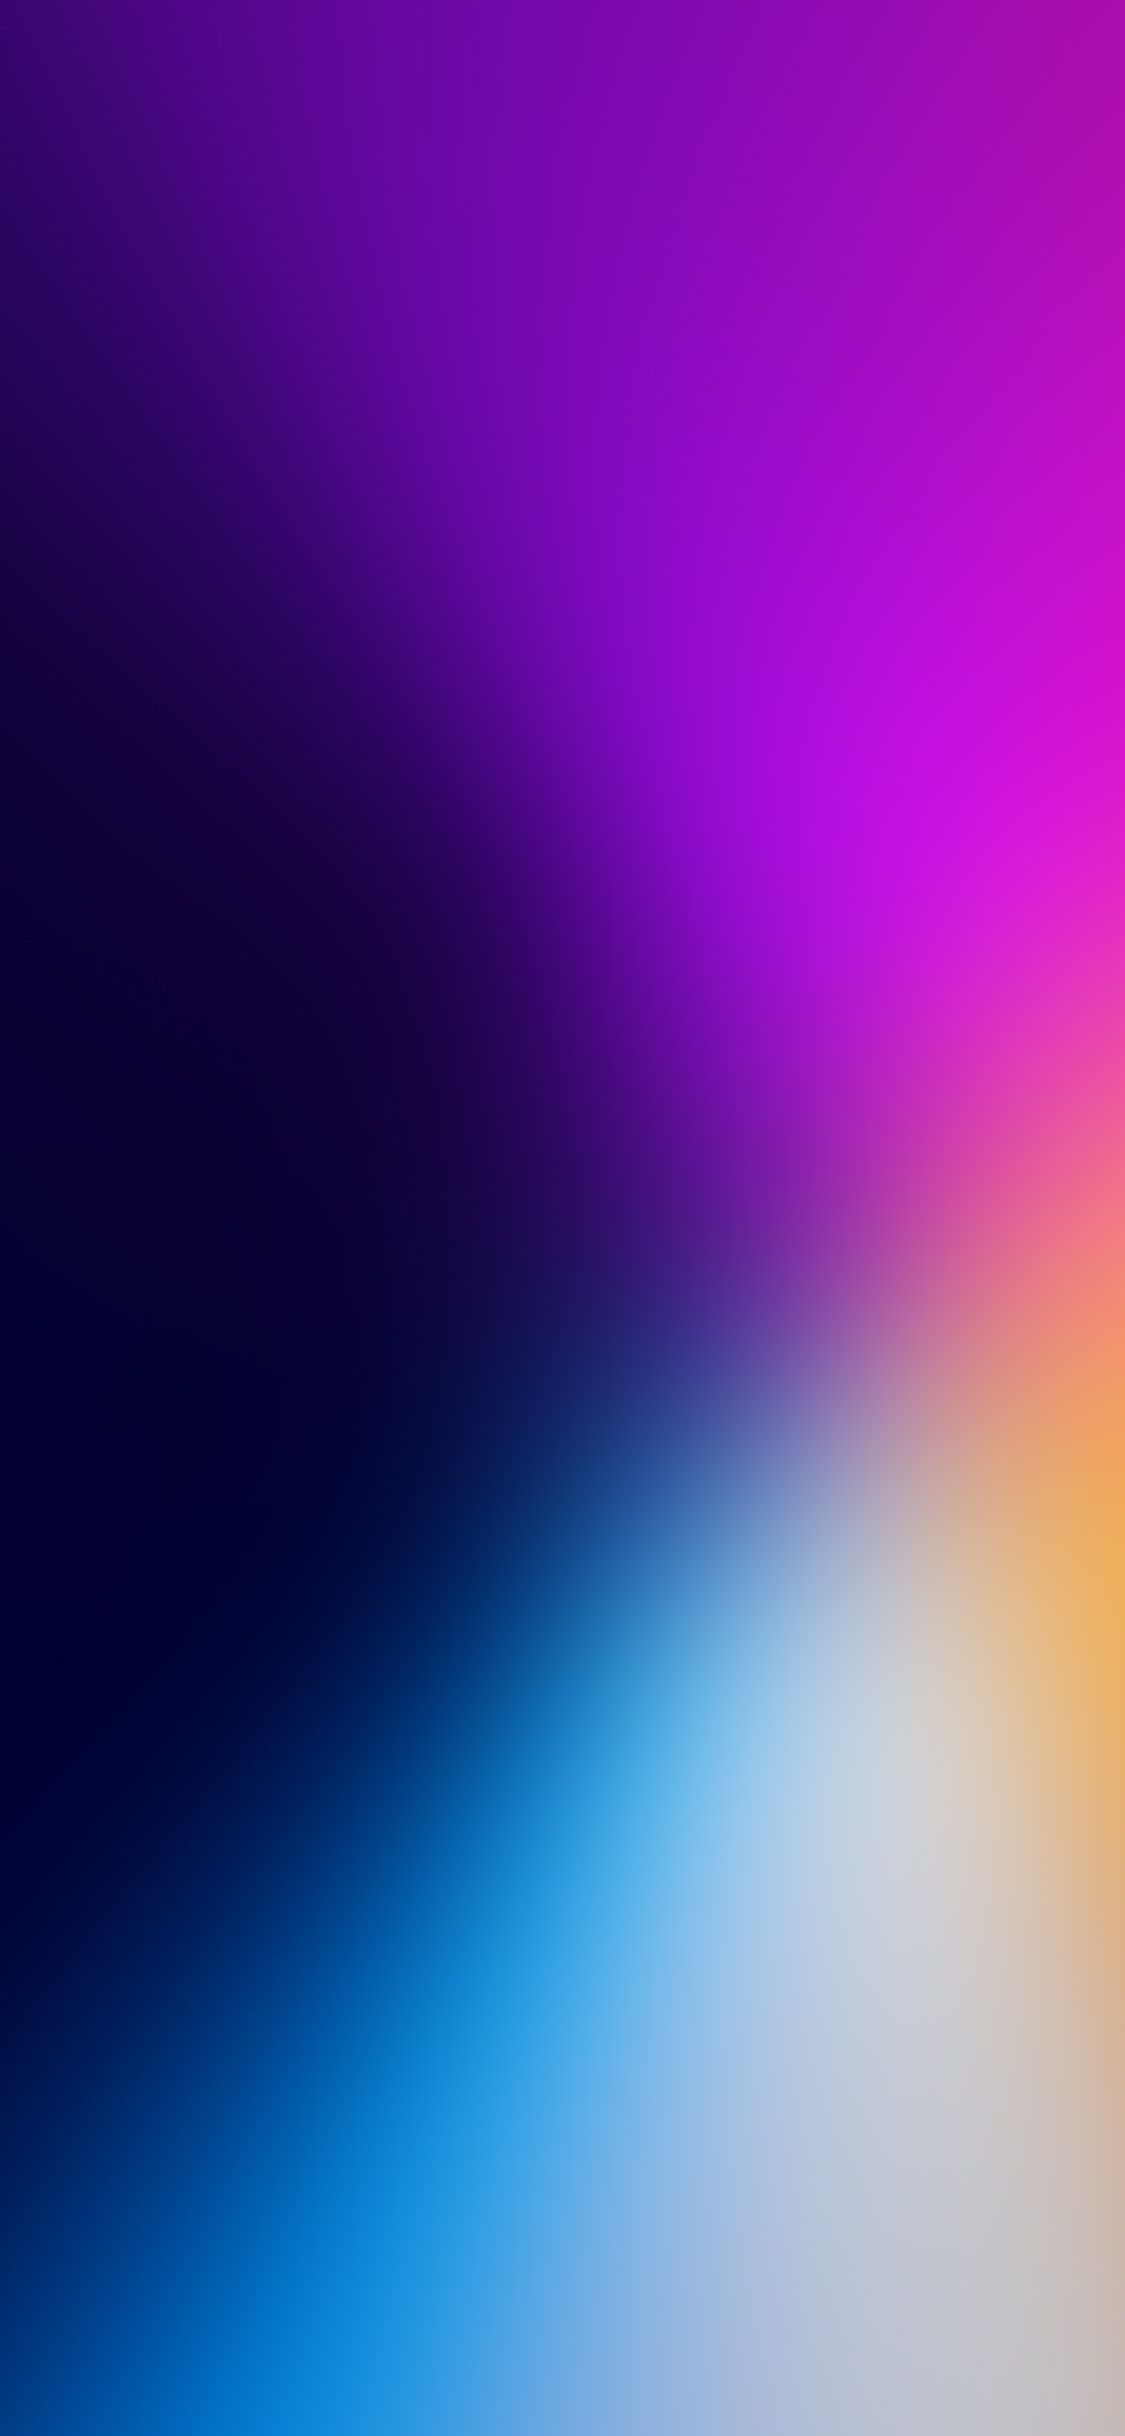 A wallpaper of a purple, blue, and yellow gradient - YouTube